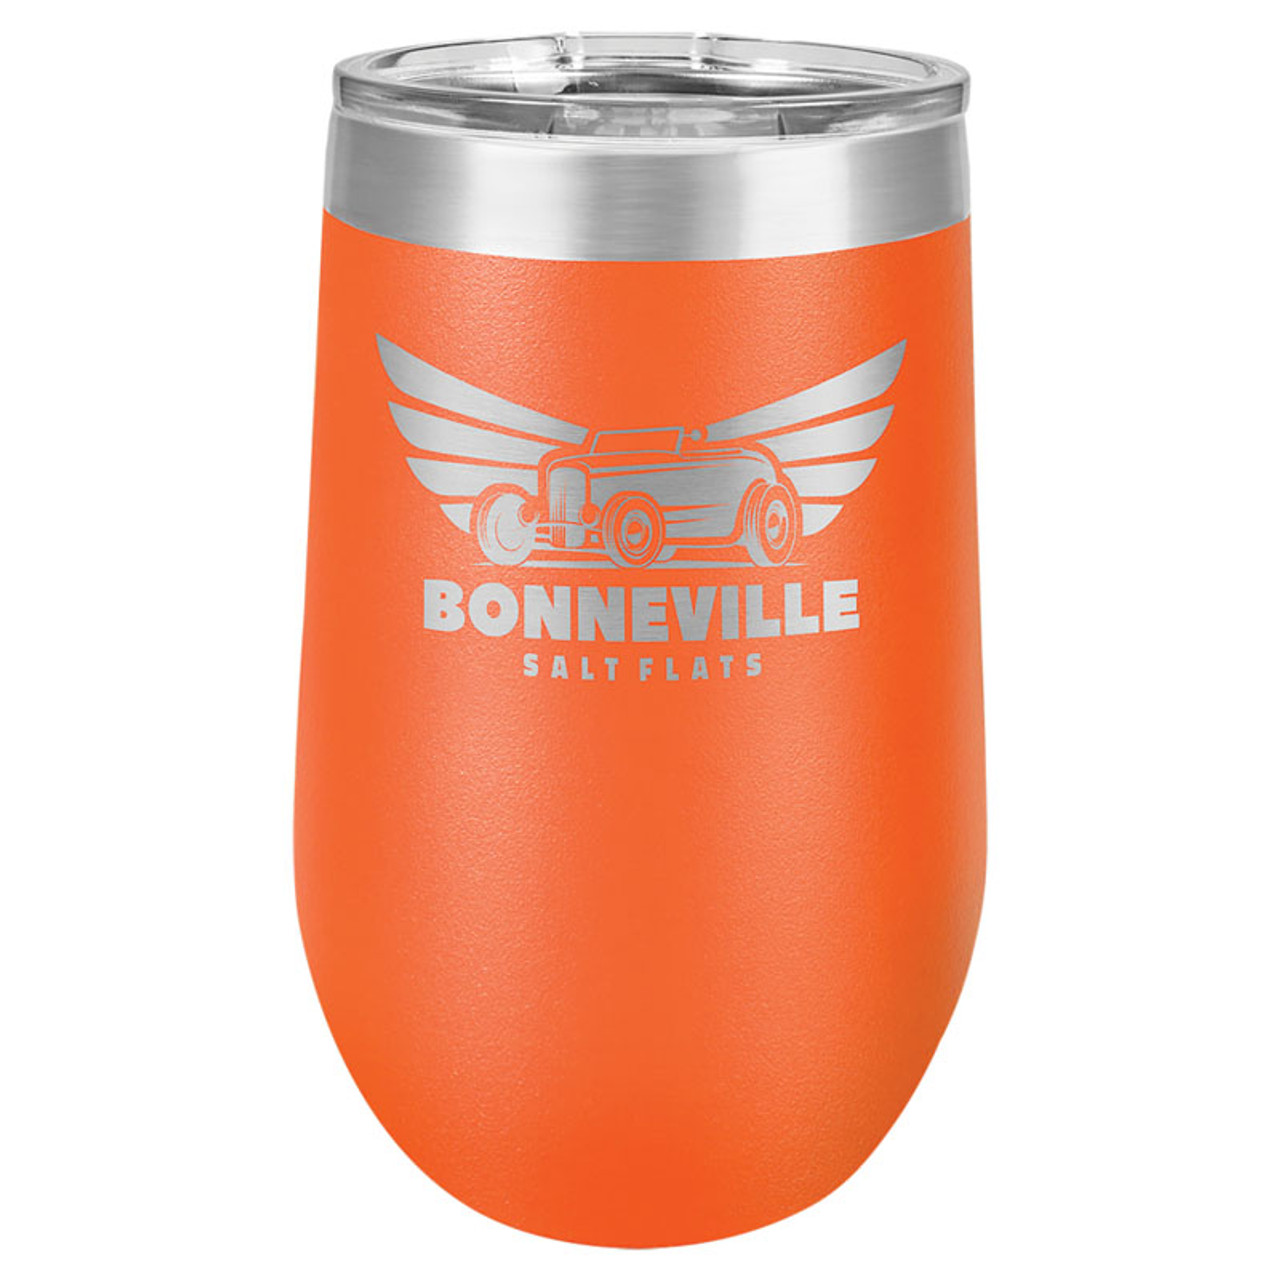 https://cdn11.bigcommerce.com/s-d22a0/images/stencil/1280x1280/products/2328/10396/personalized-tumblers-orange-custom-engraved-polar-camel-16oz__55647.1546460018.jpg?c=2